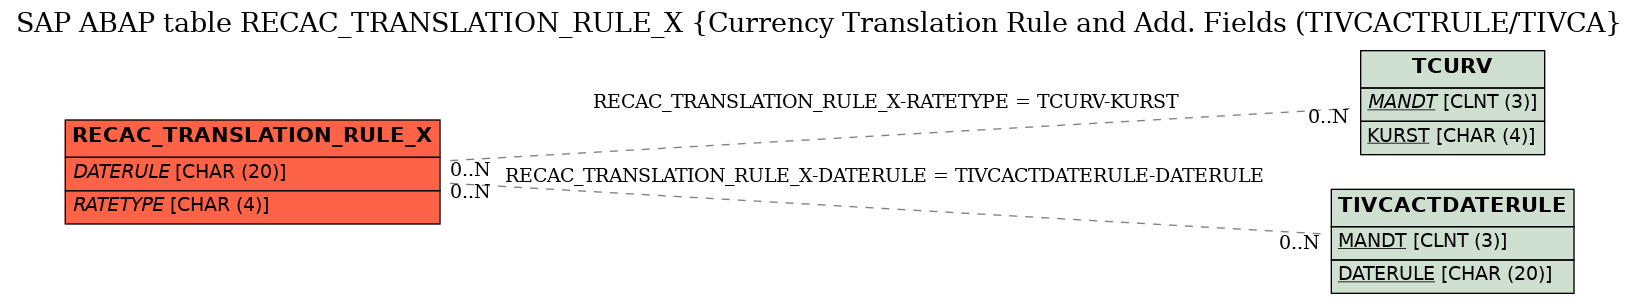 E-R Diagram for table RECAC_TRANSLATION_RULE_X (Currency Translation Rule and Add. Fields (TIVCACTRULE/TIVCA)